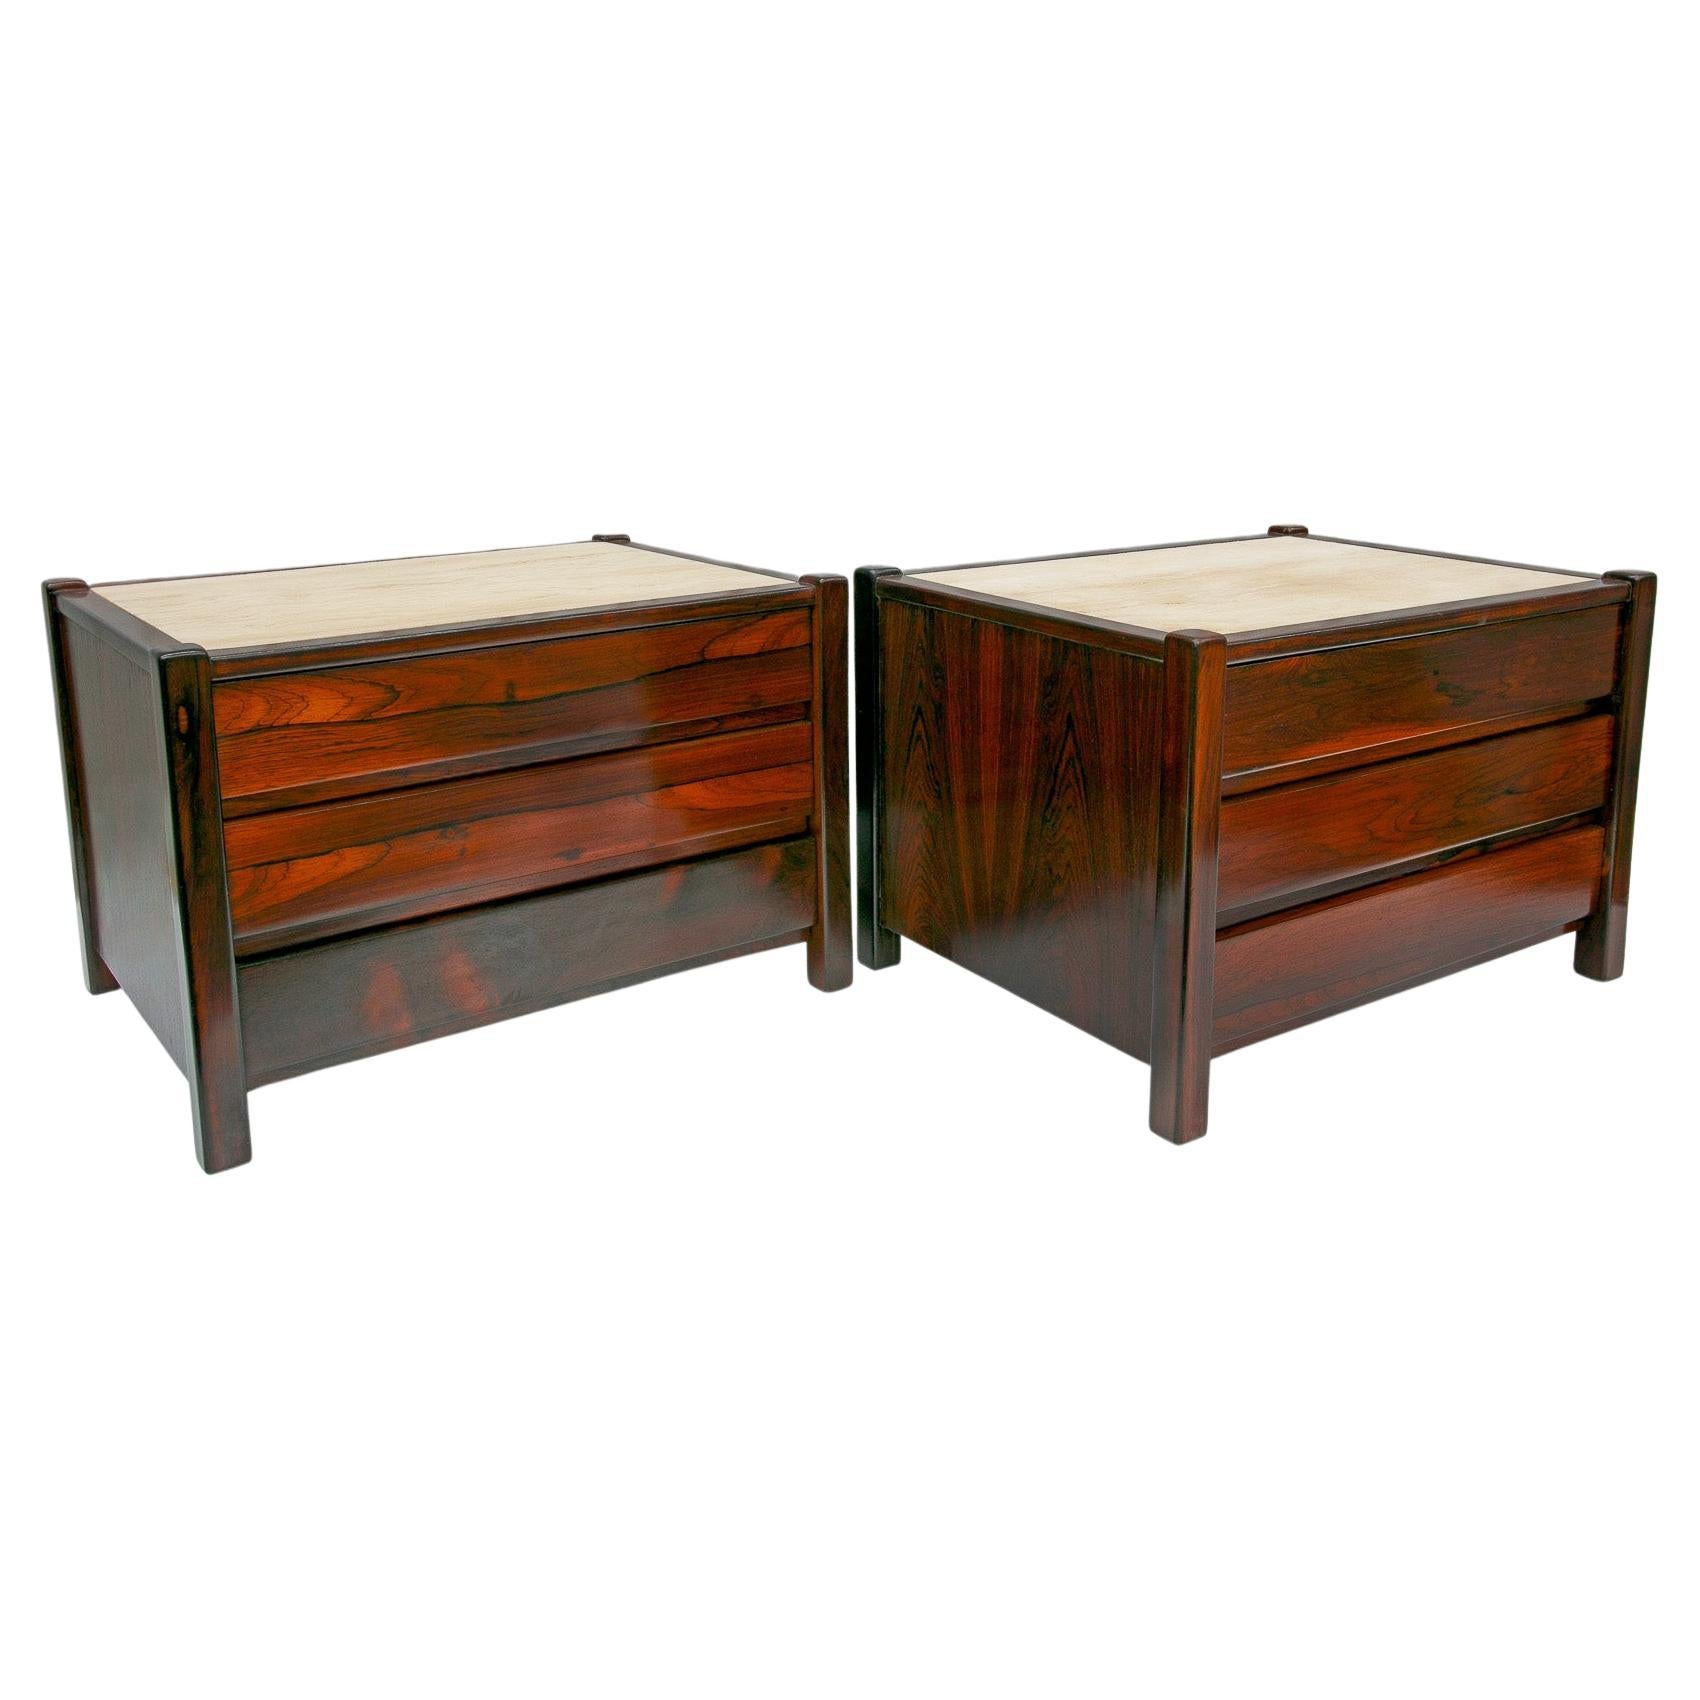 Brazilian Modern Side Tables Set with Drawers, Travertine & Hardwood by Celina